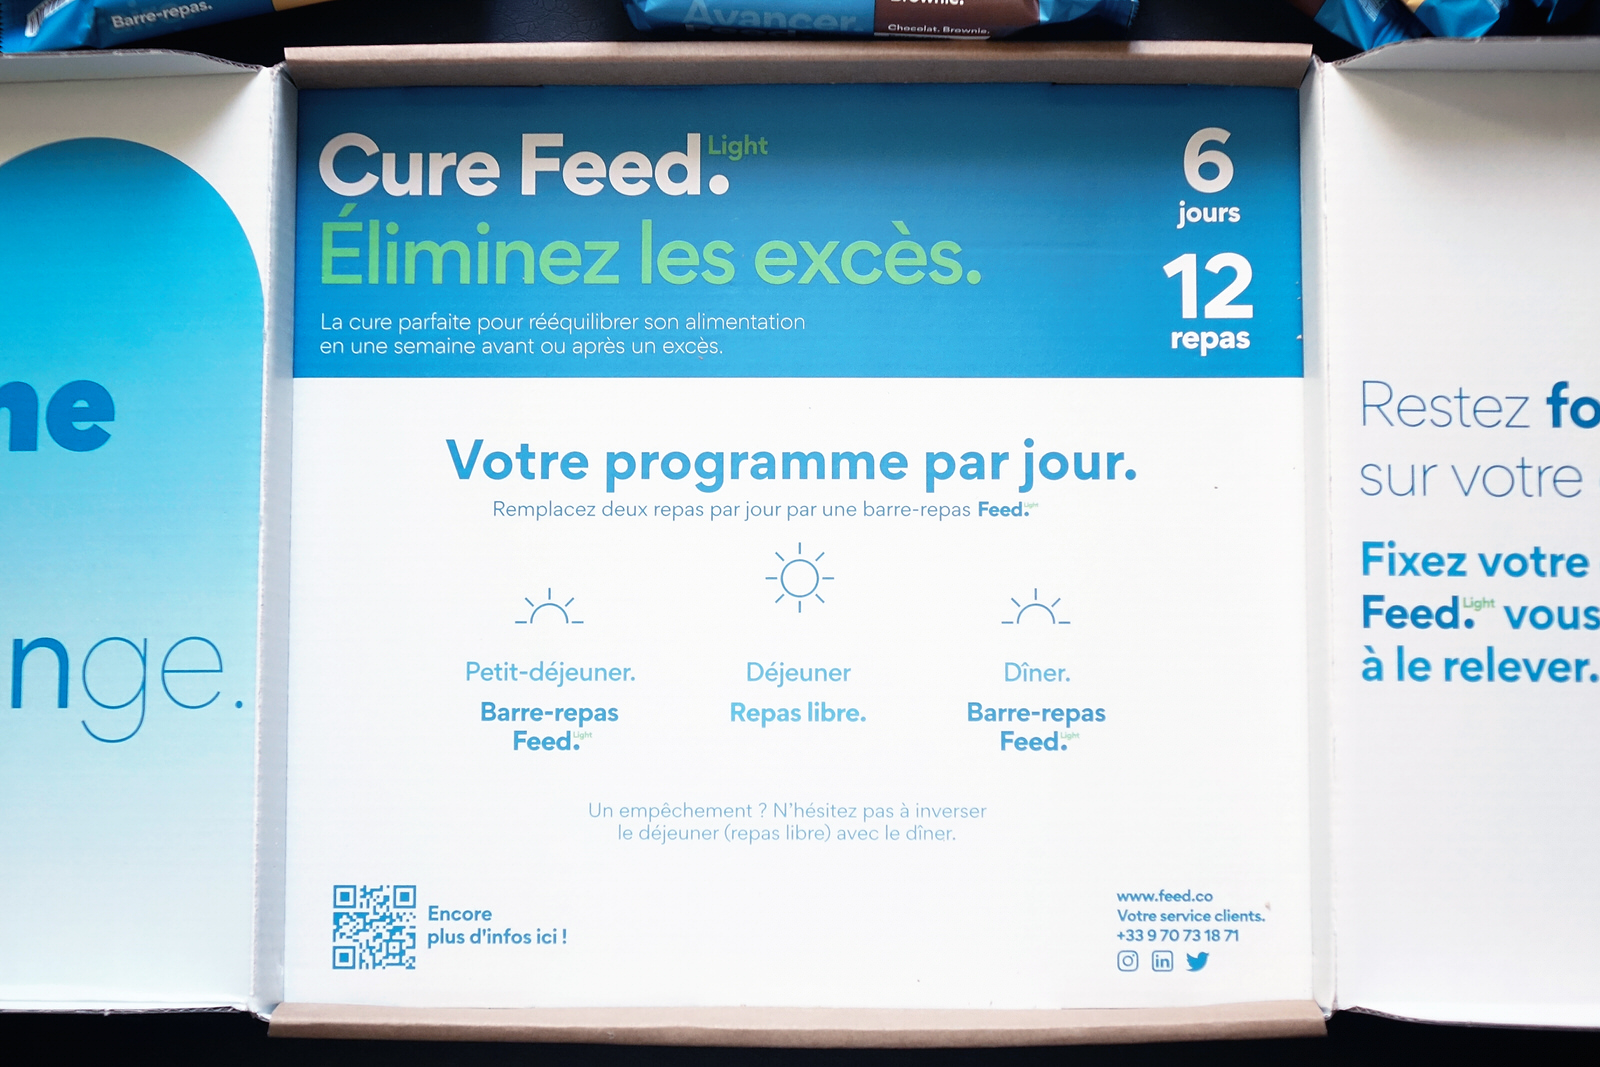 Les cures Feed